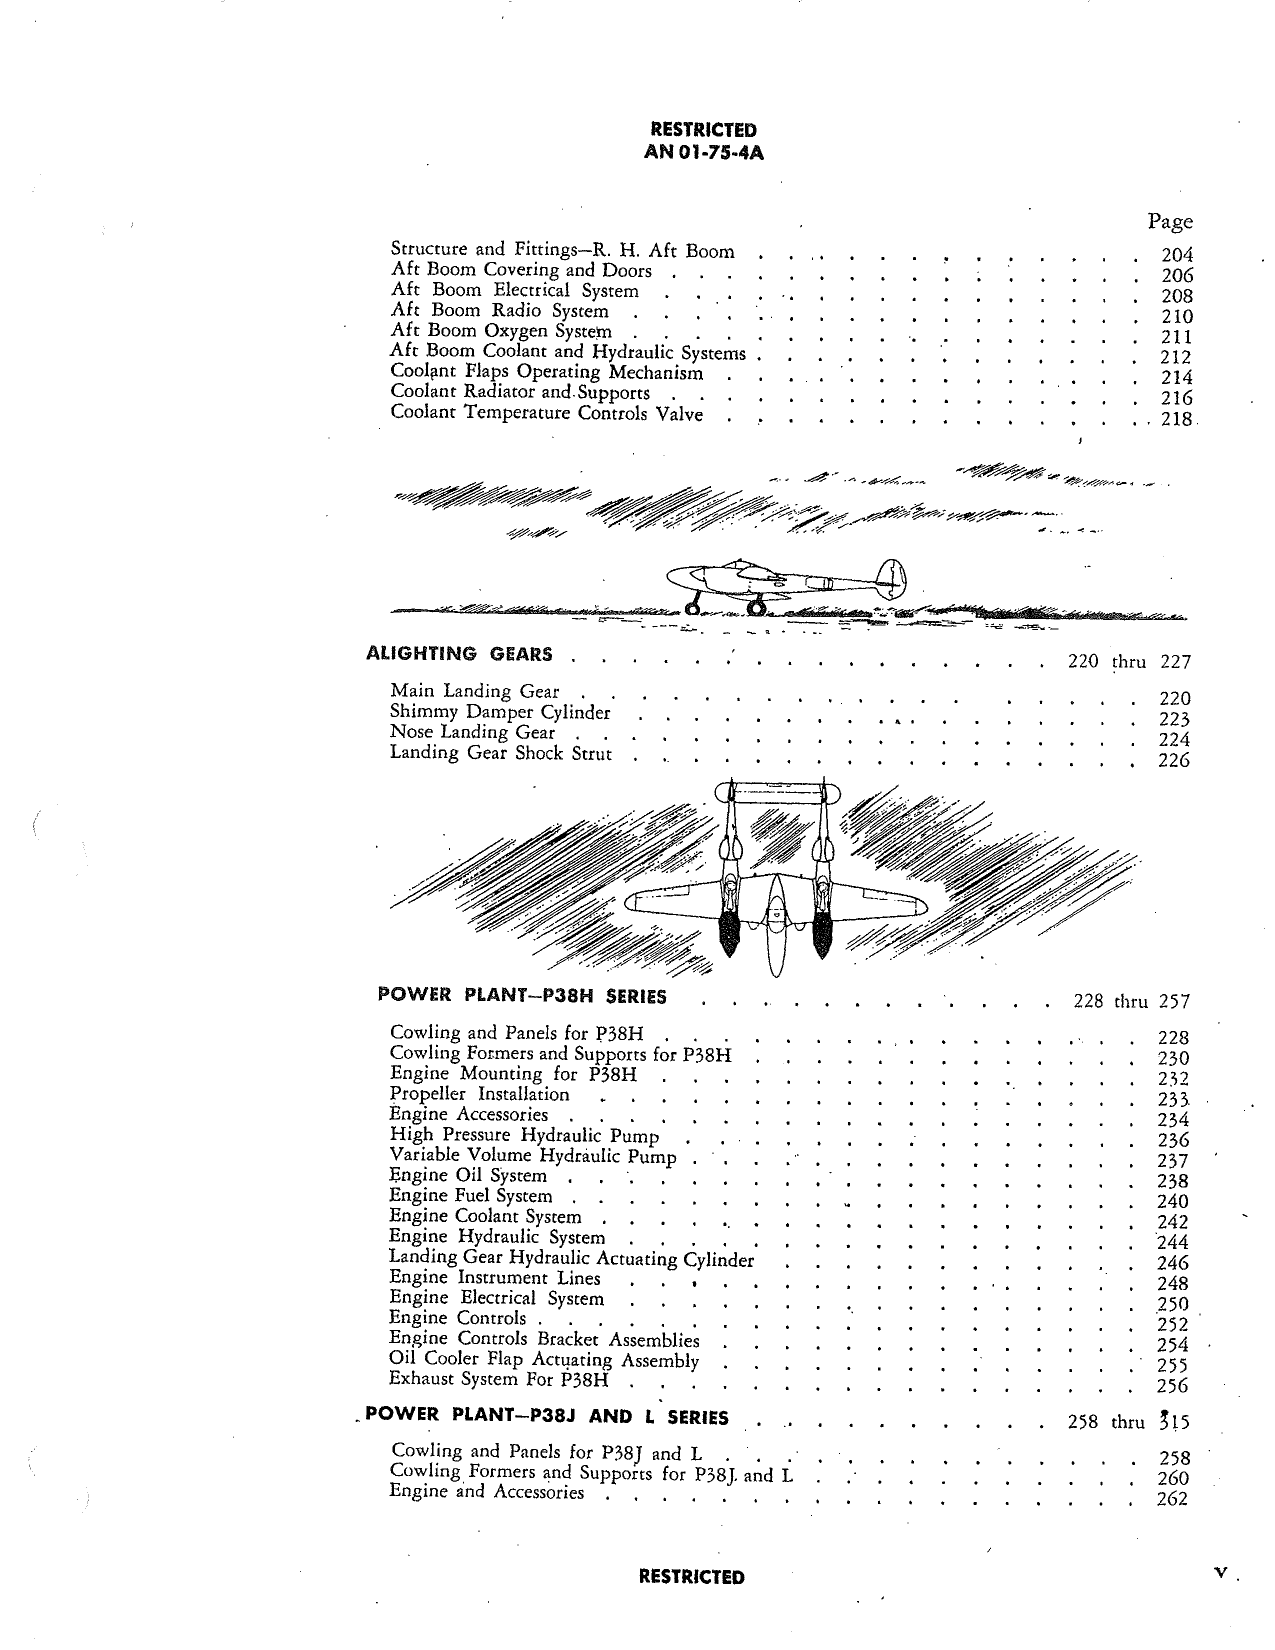 Sample page 7 from AirCorps Library document: Parts Catalog for Airplane Models P-38H, P-38J, P-38L, and F-5B